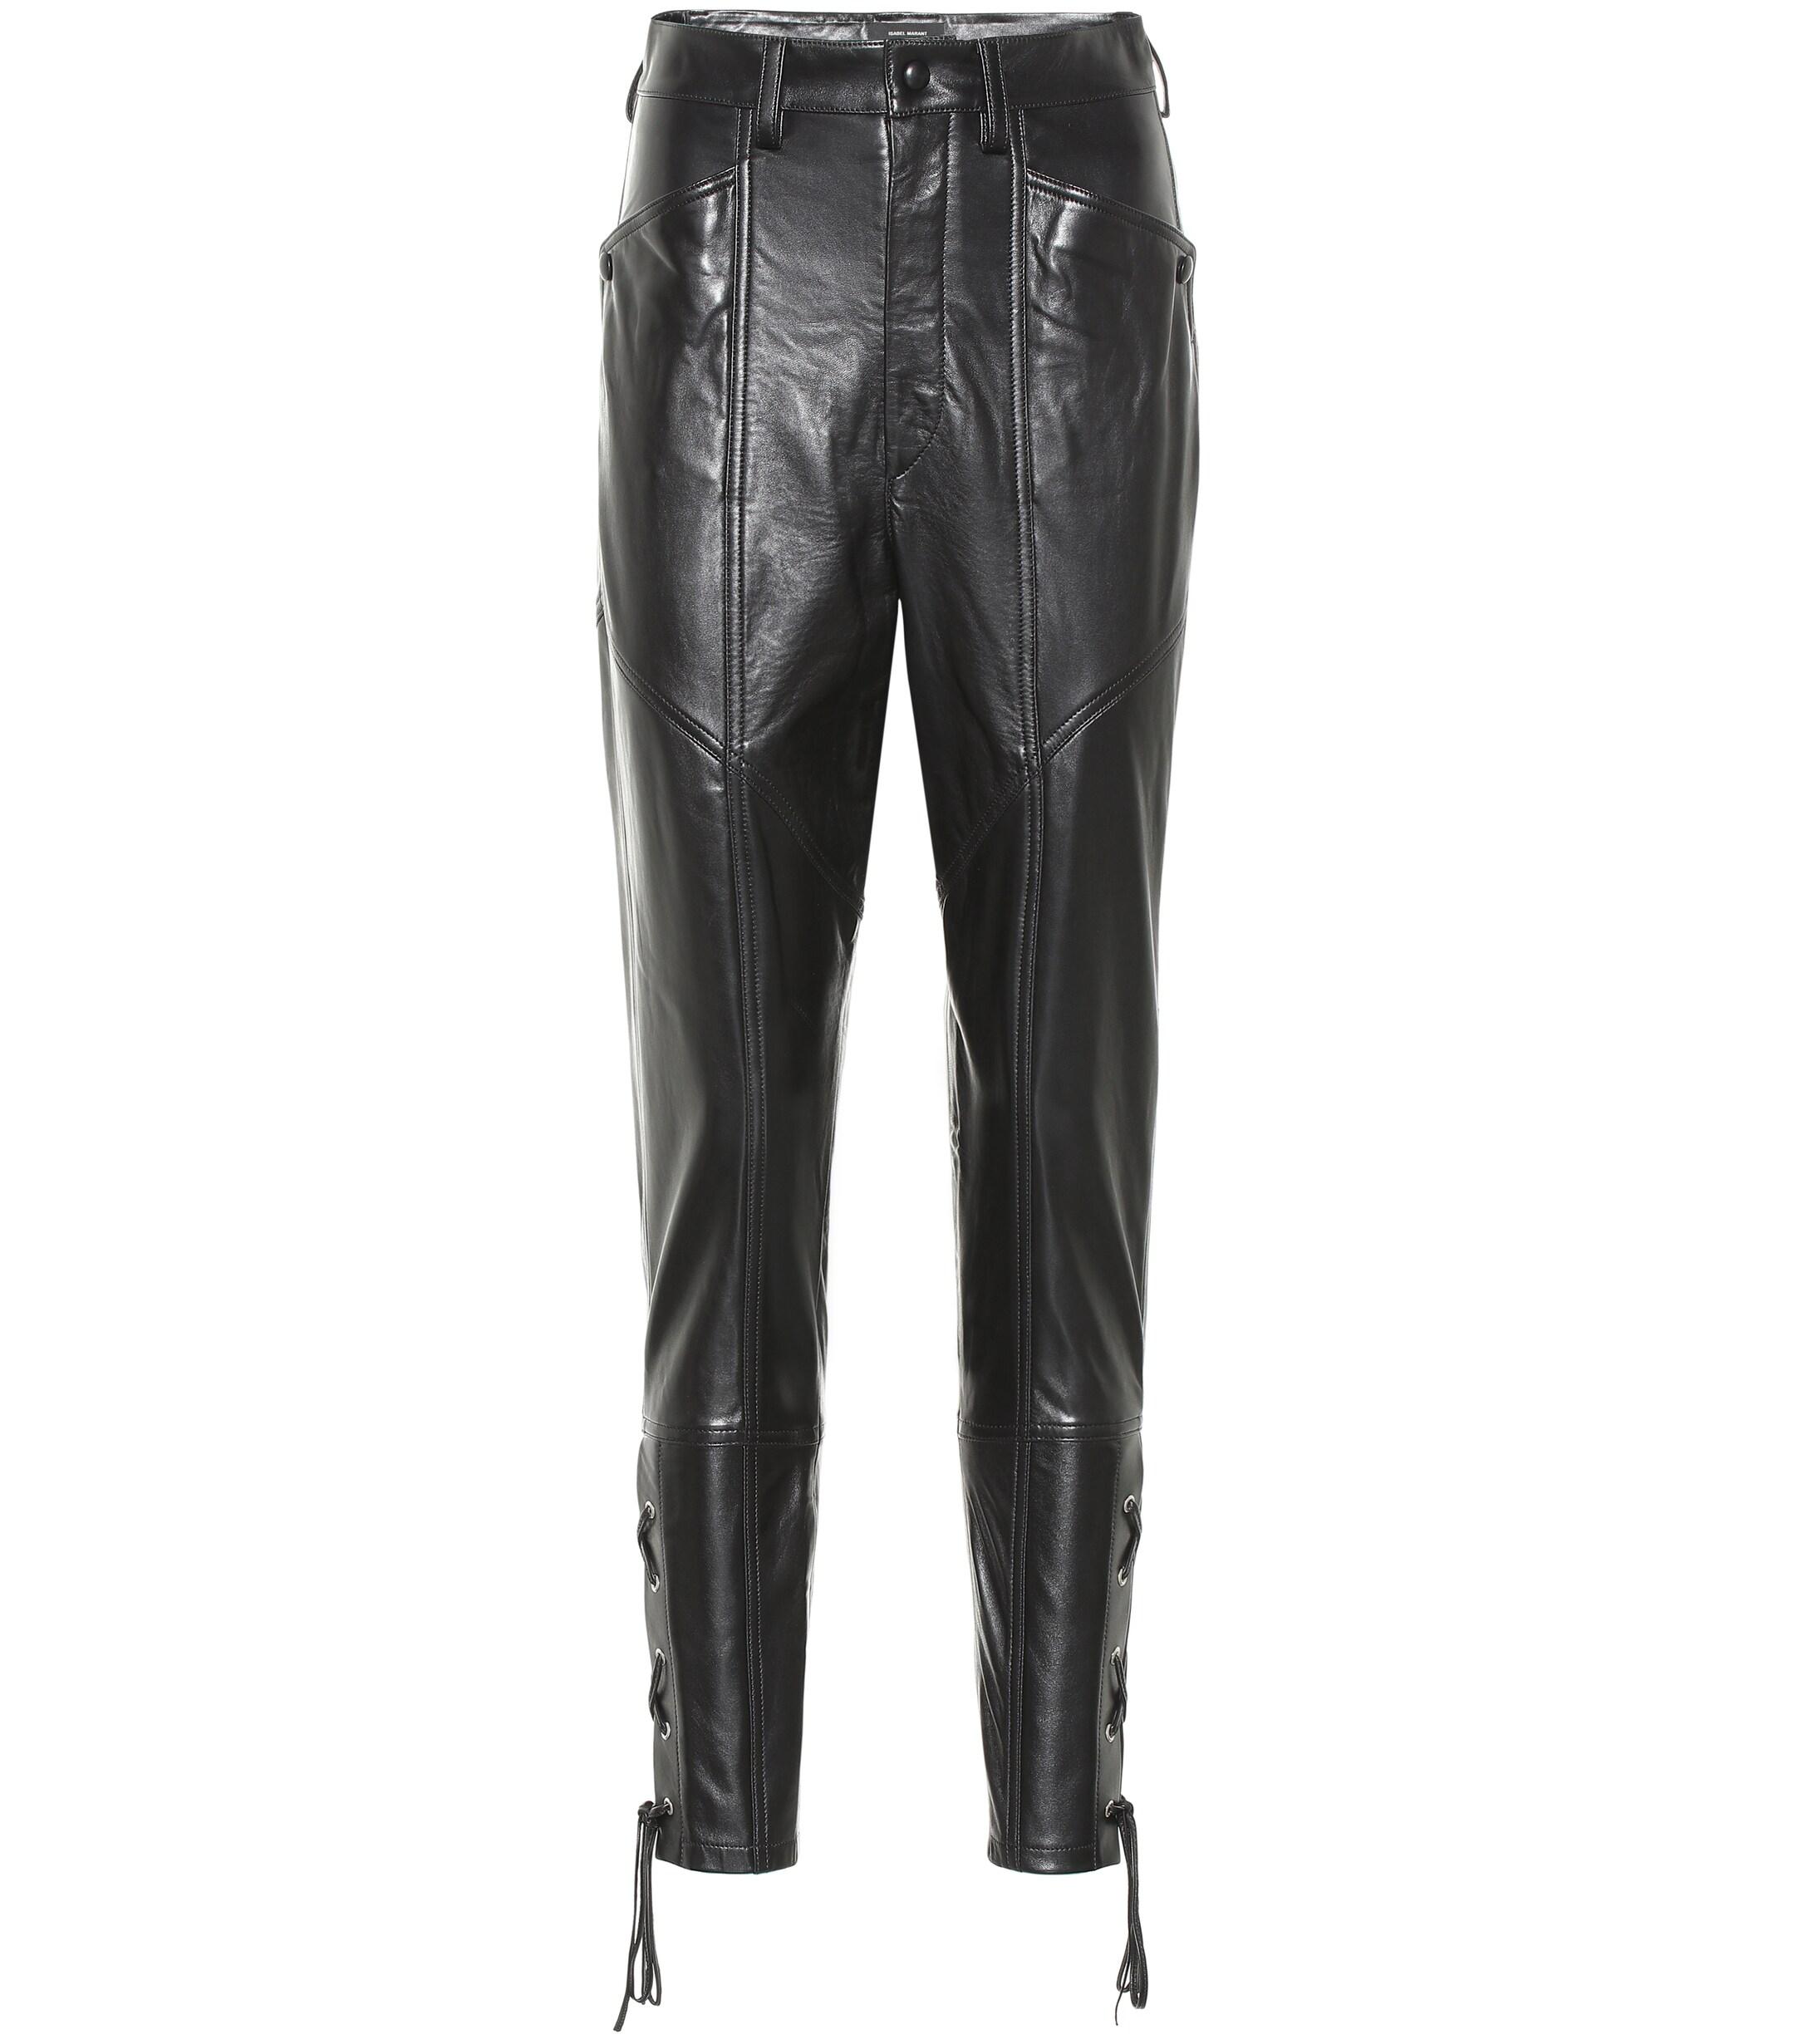 Isabel Marant Cadix Leather Pants in Black - Lyst